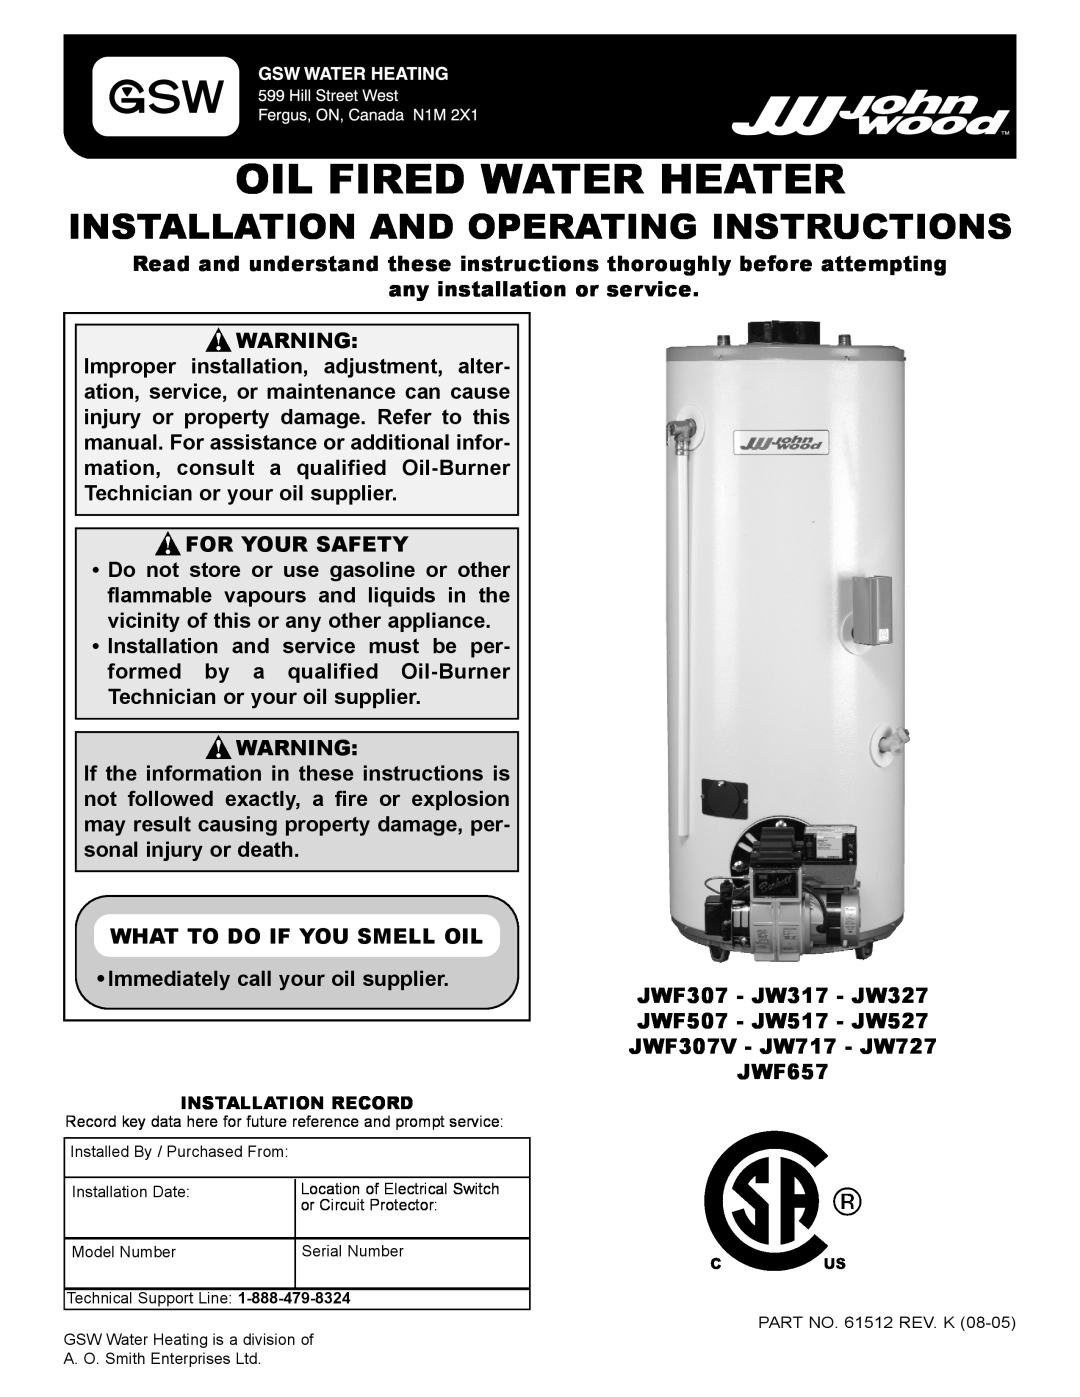 Smith Cast Iron Boilers JW727, JWF507, JWF657, JW527 manual Oil Fired Water Heater, Installation And Operating Instructions 